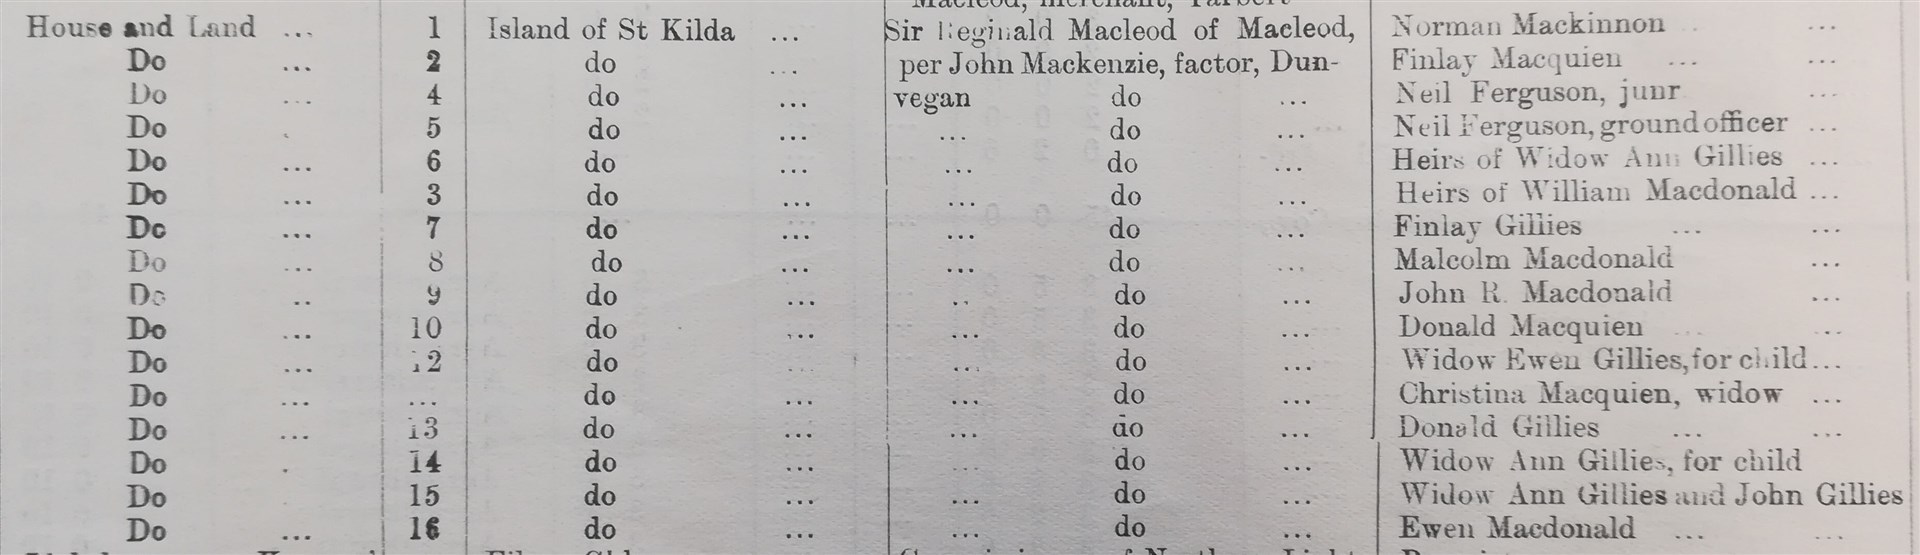 Extract from the County of Inverness Valuation Roll showing residents of St Kilda, 1930.